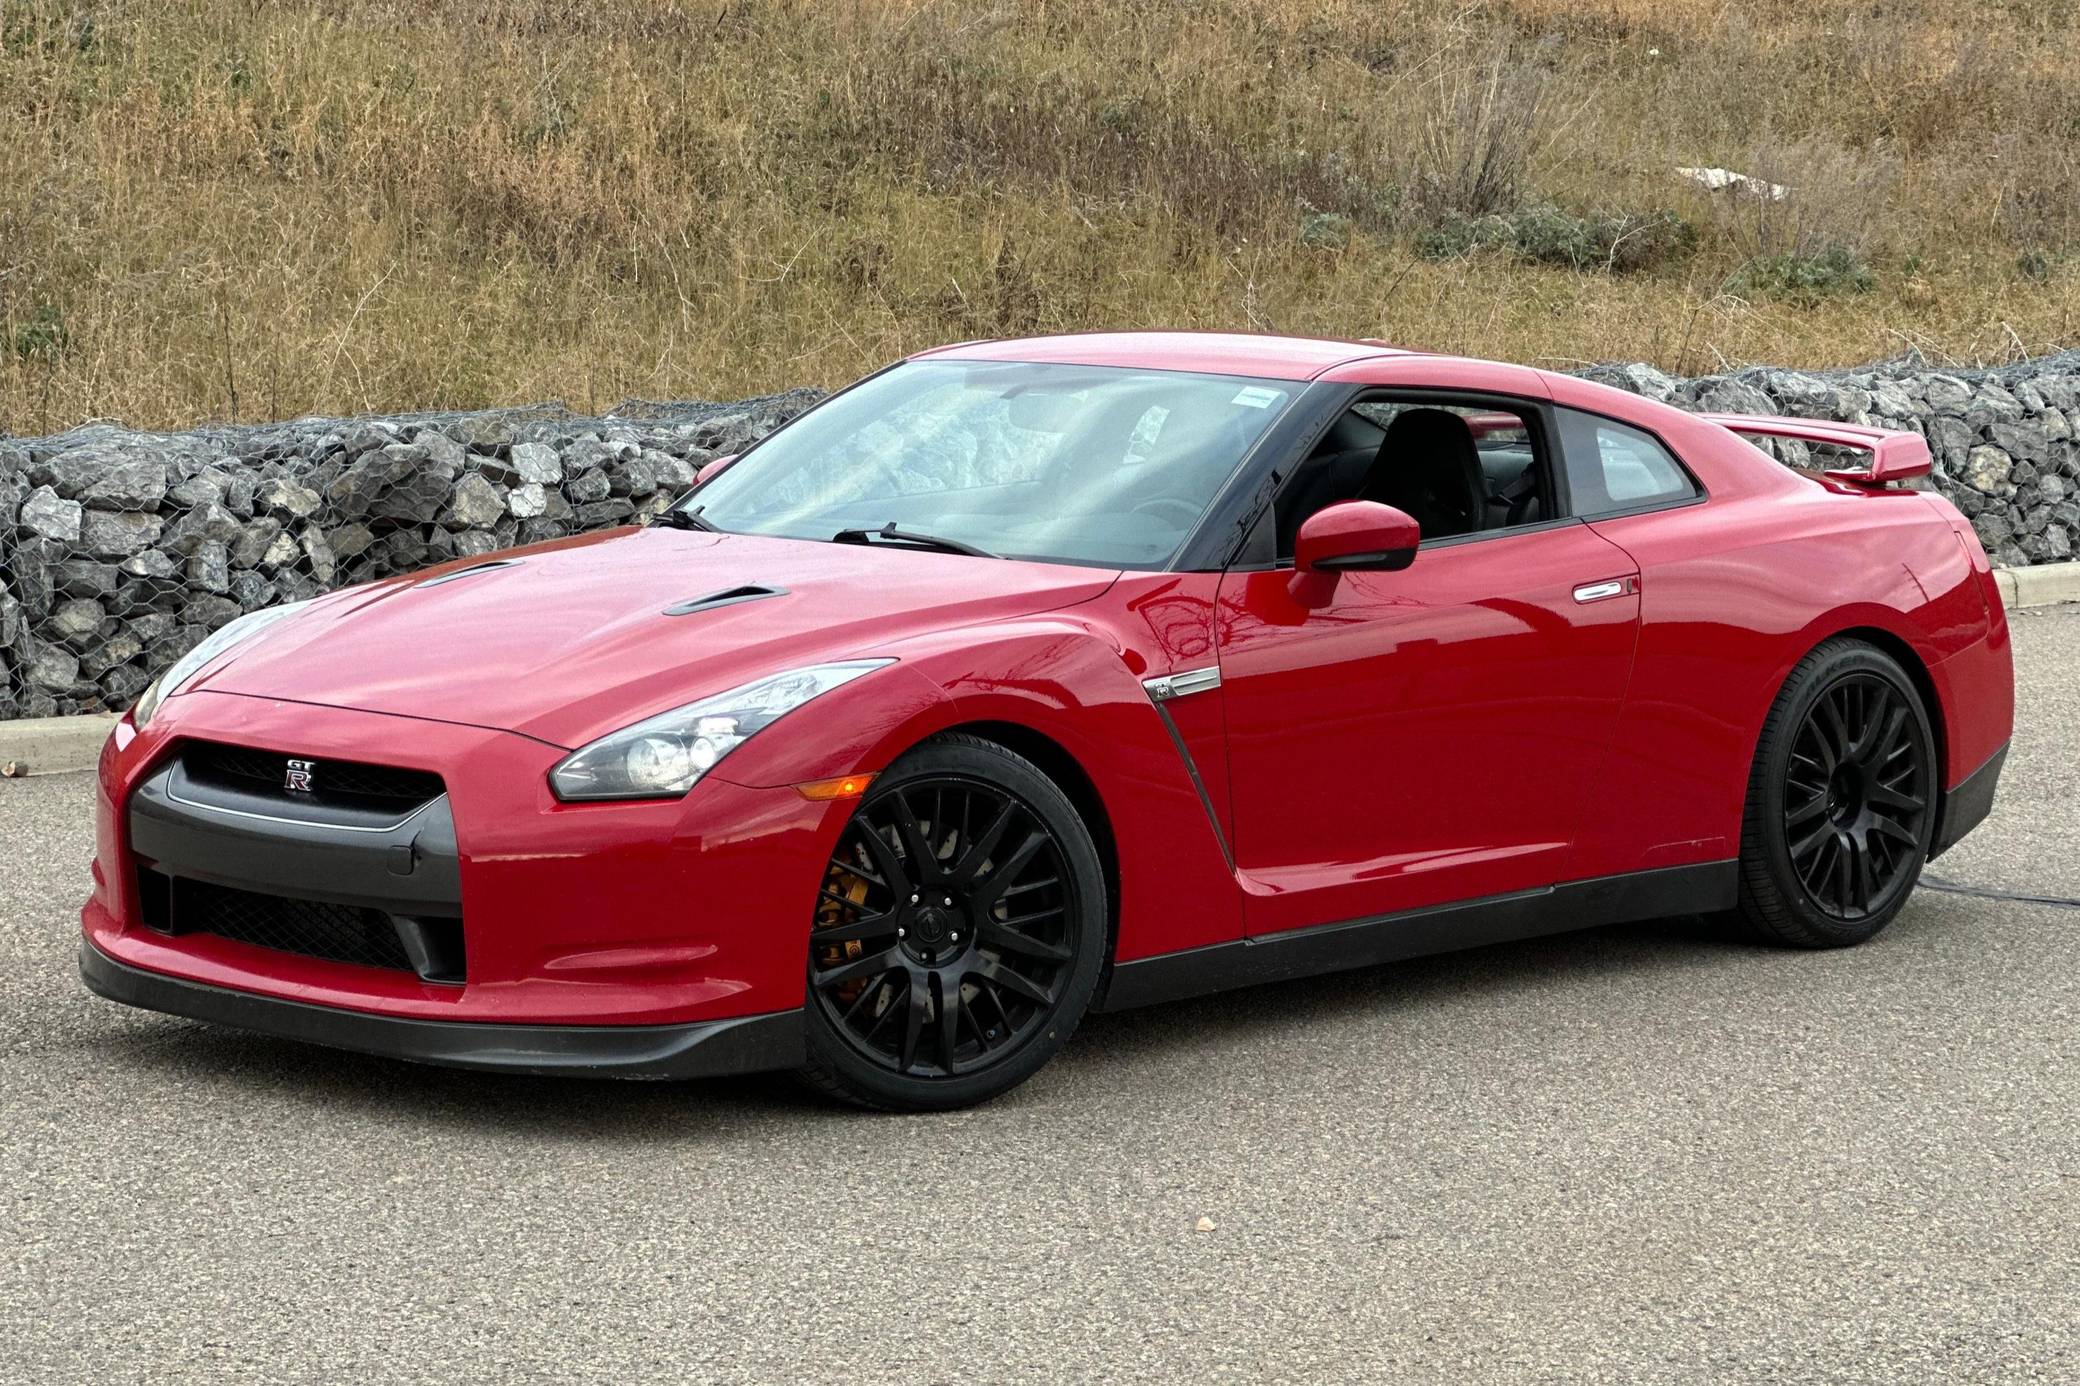 How to Build a 7-Second, 175-MPH Nissan GT-R